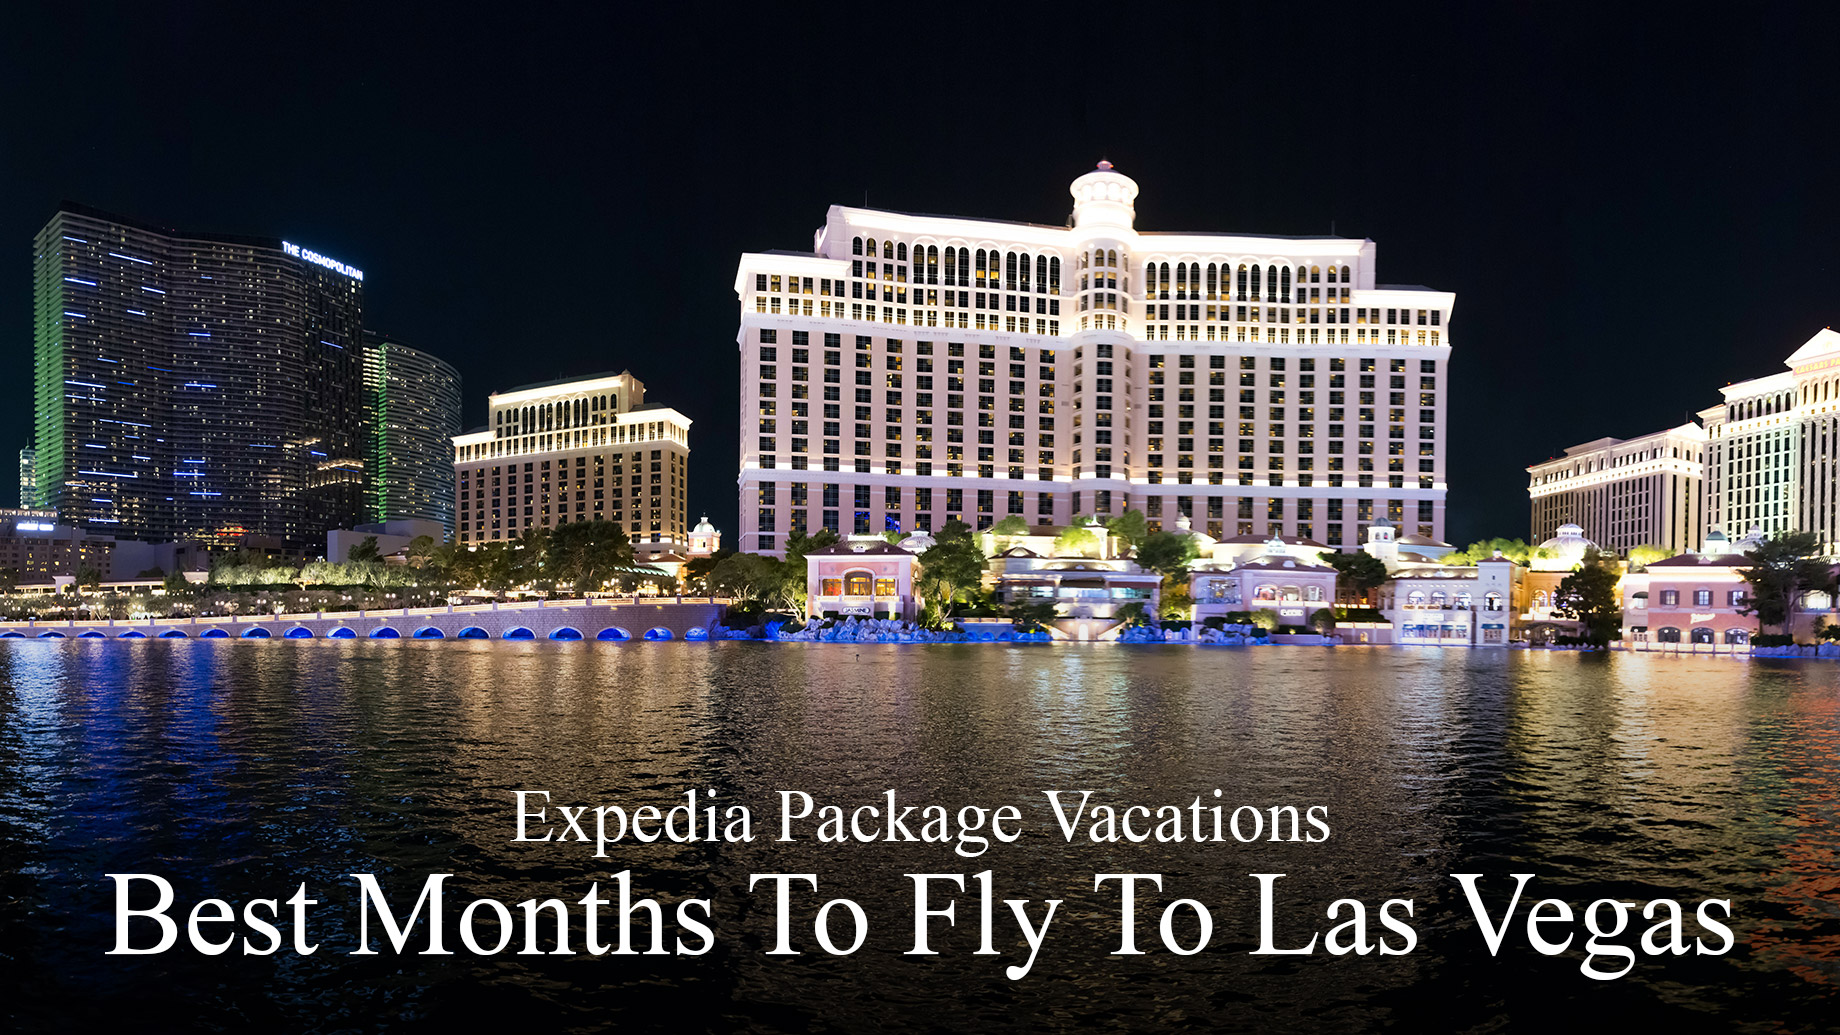 Expedia Package Vacations - Best Months To Fly To Las Vegas